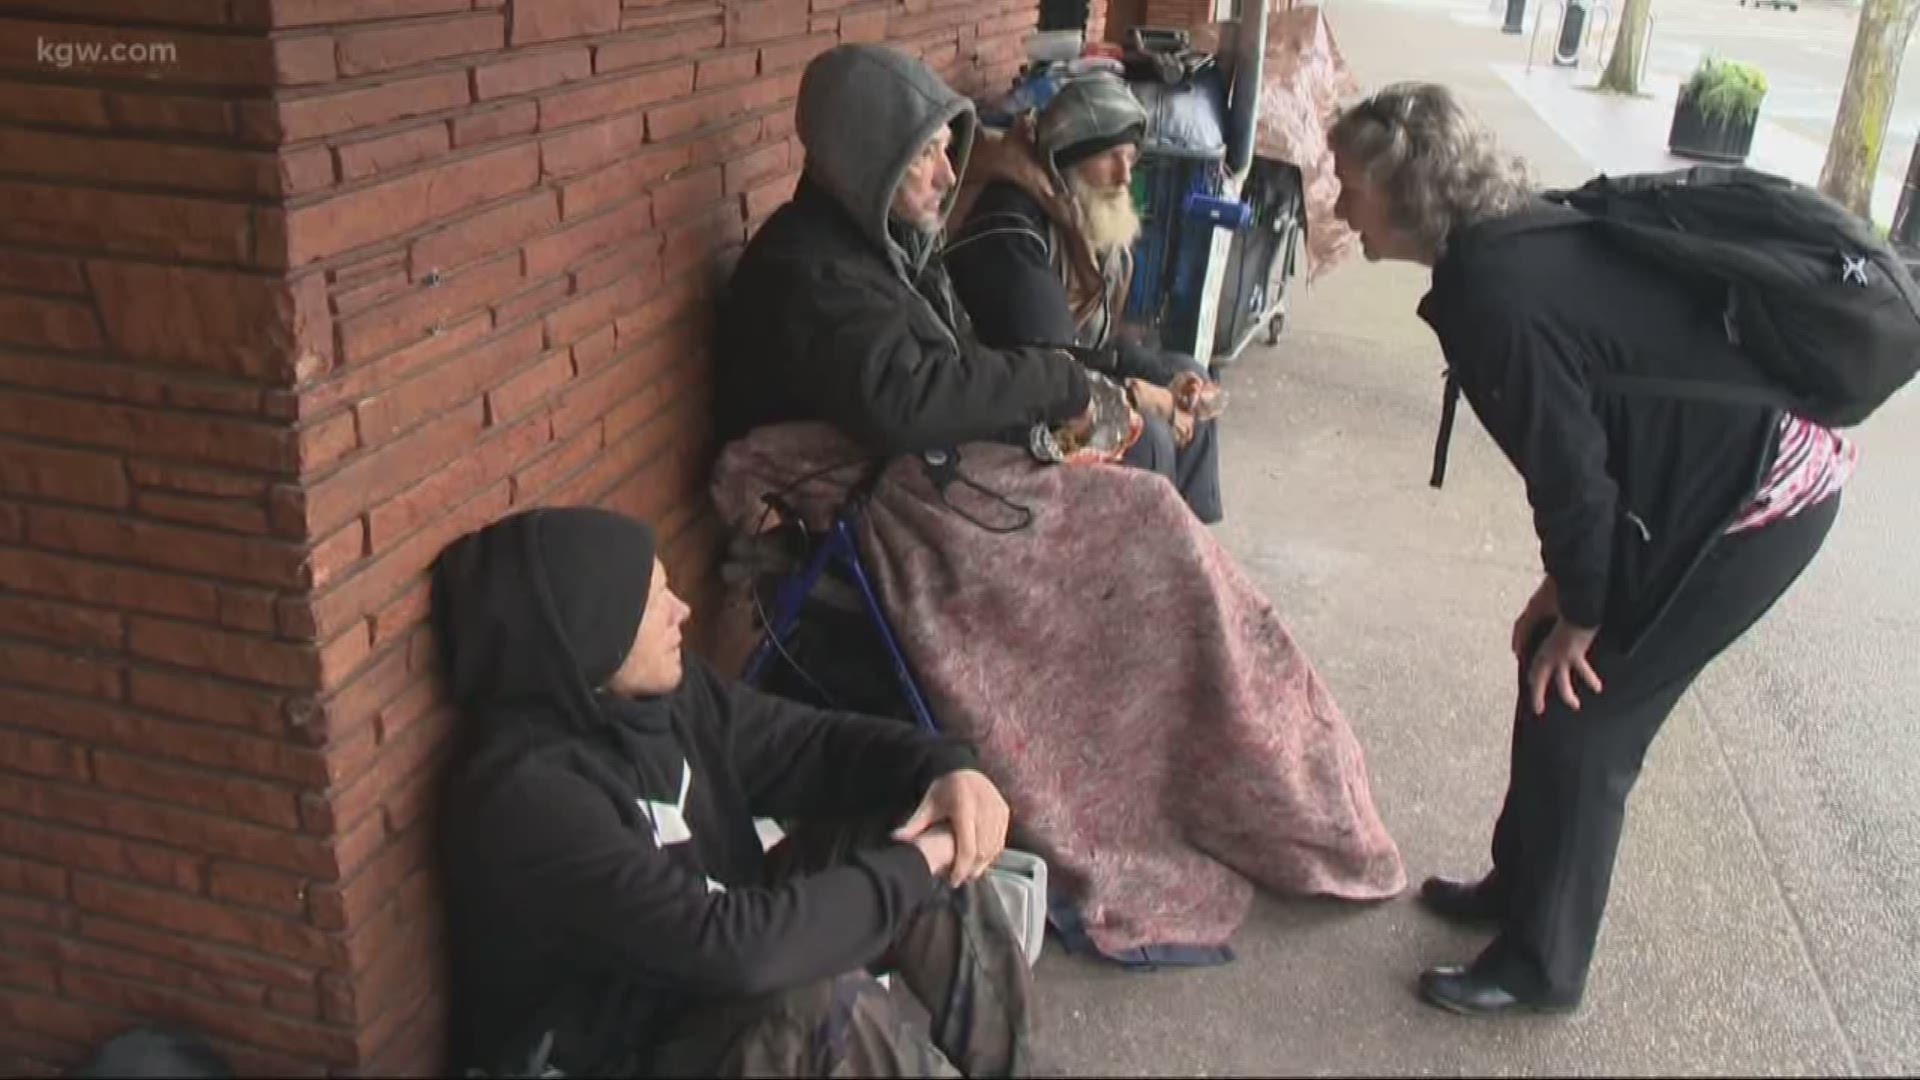 70-year-old Jean Hendron Wednesday resumed, what’s recently become, her daily routine: combing the streets of Salem to check on the city's homeless.